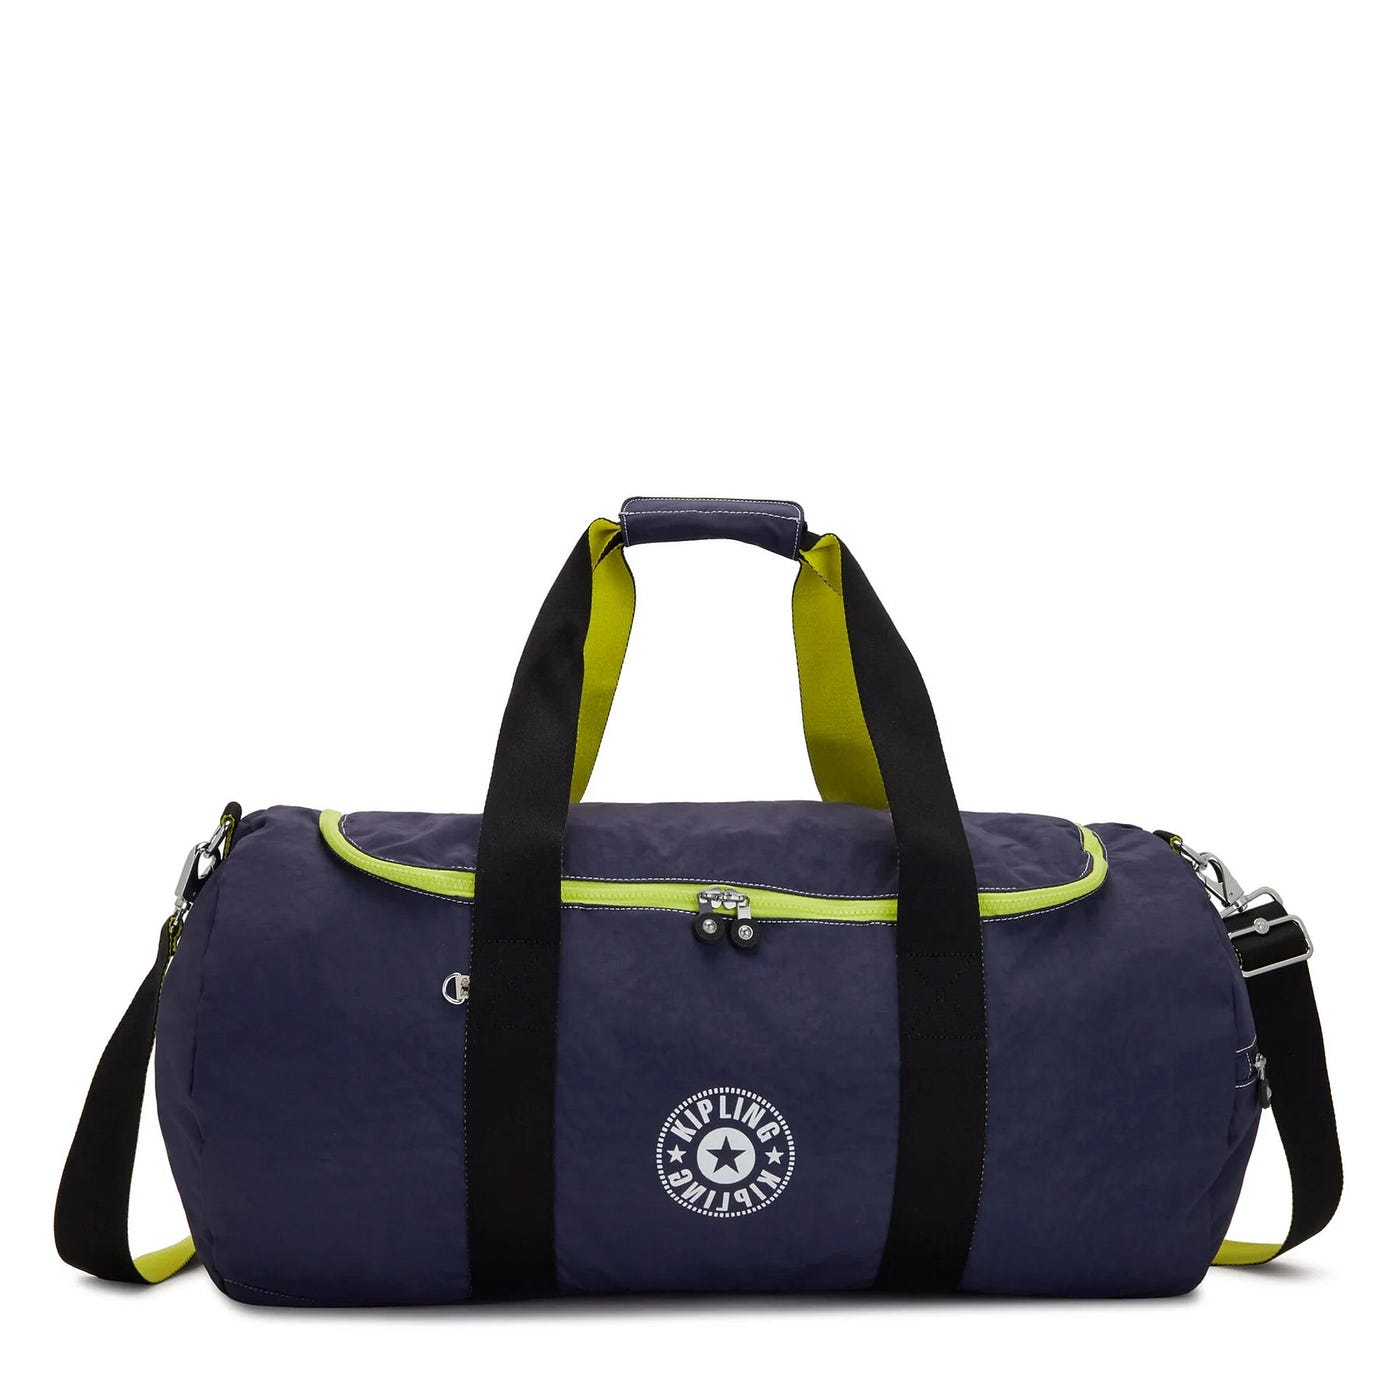 Duffle Bags To Make Your Gym Visits A Breeze | by Kipling | Jul, 2023 |  Medium